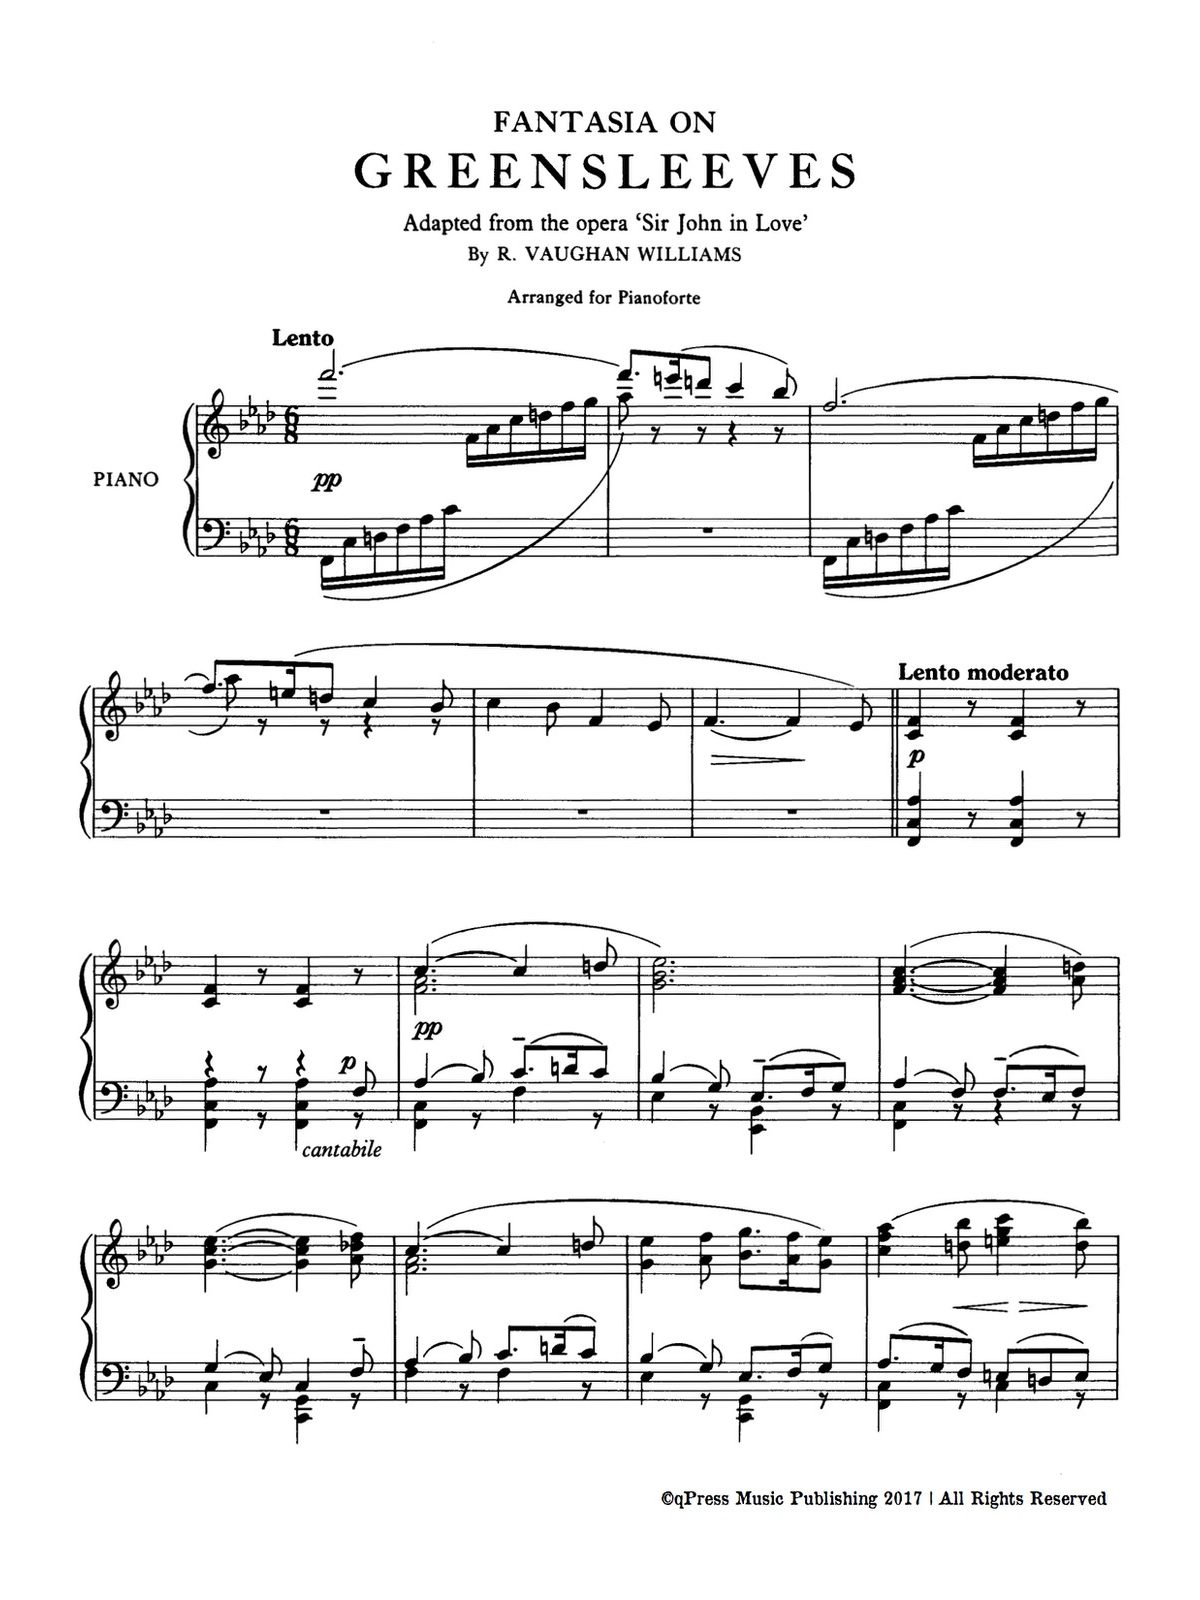 Vaughan Williams, Fantasia on Greensleeves arr Piano-p3